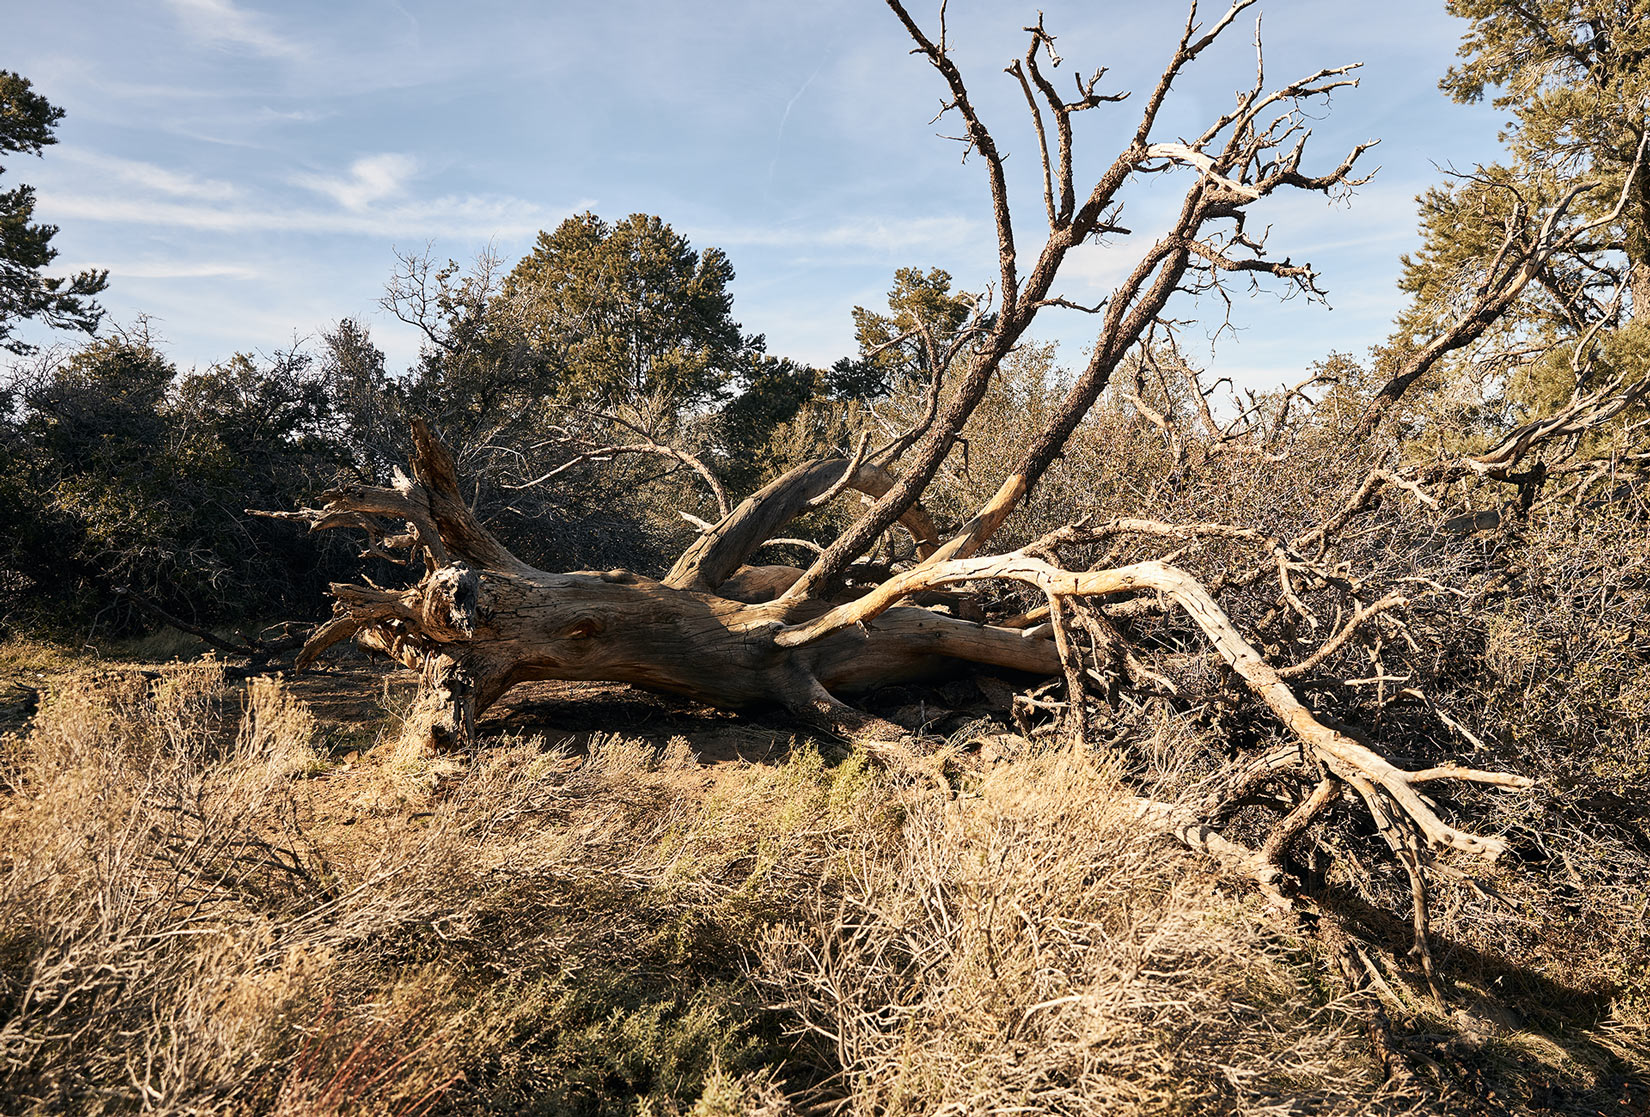 Old Tree leaning in the Mojave Desert